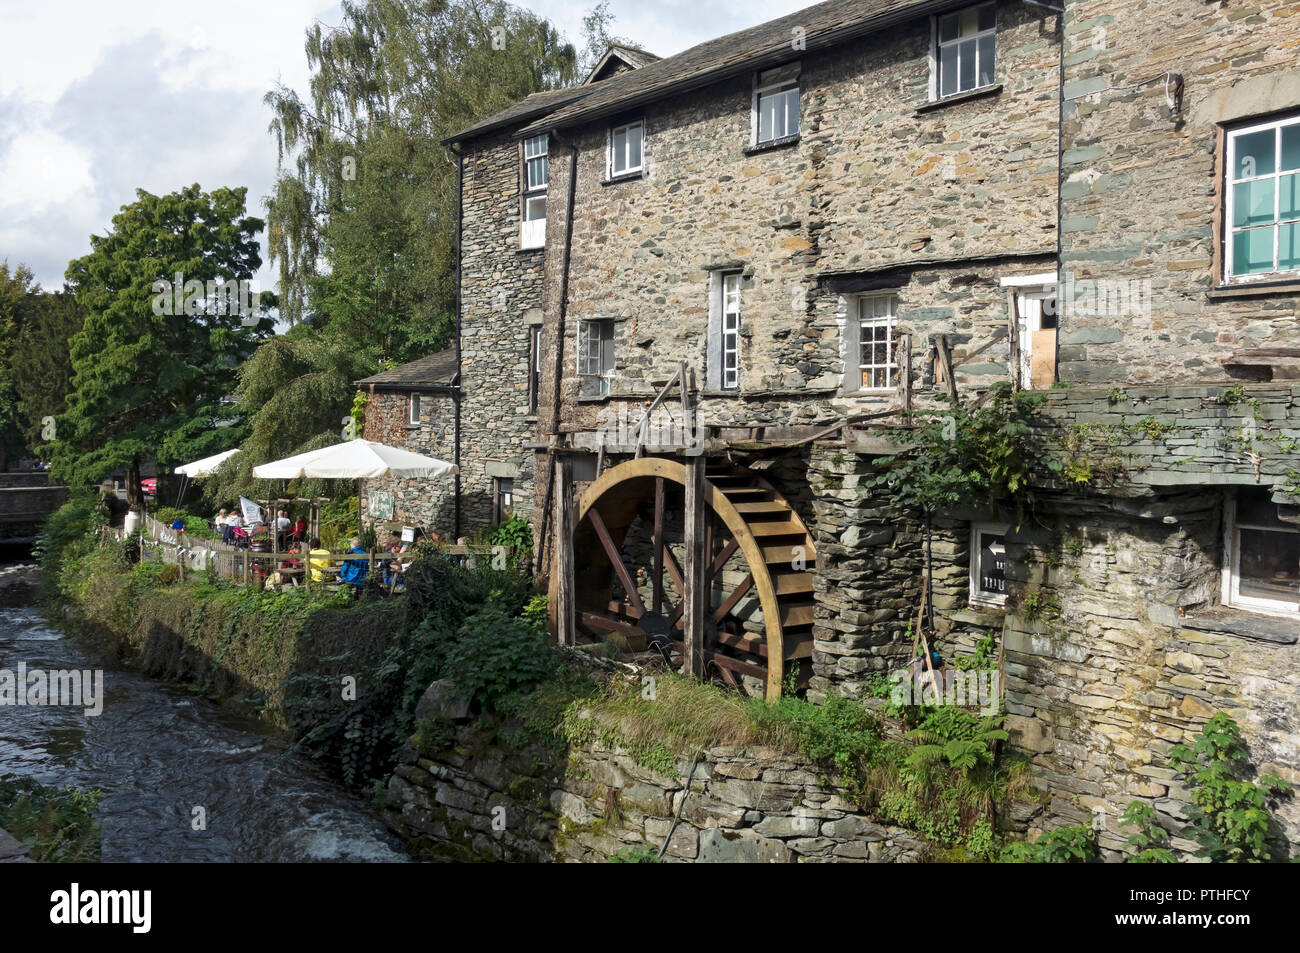 The Old Mill and and people sitting outside the Giggling Goose cafe in summer Ambleside Cumbria England UK United Kingdom GB Great Britain Stock Photo